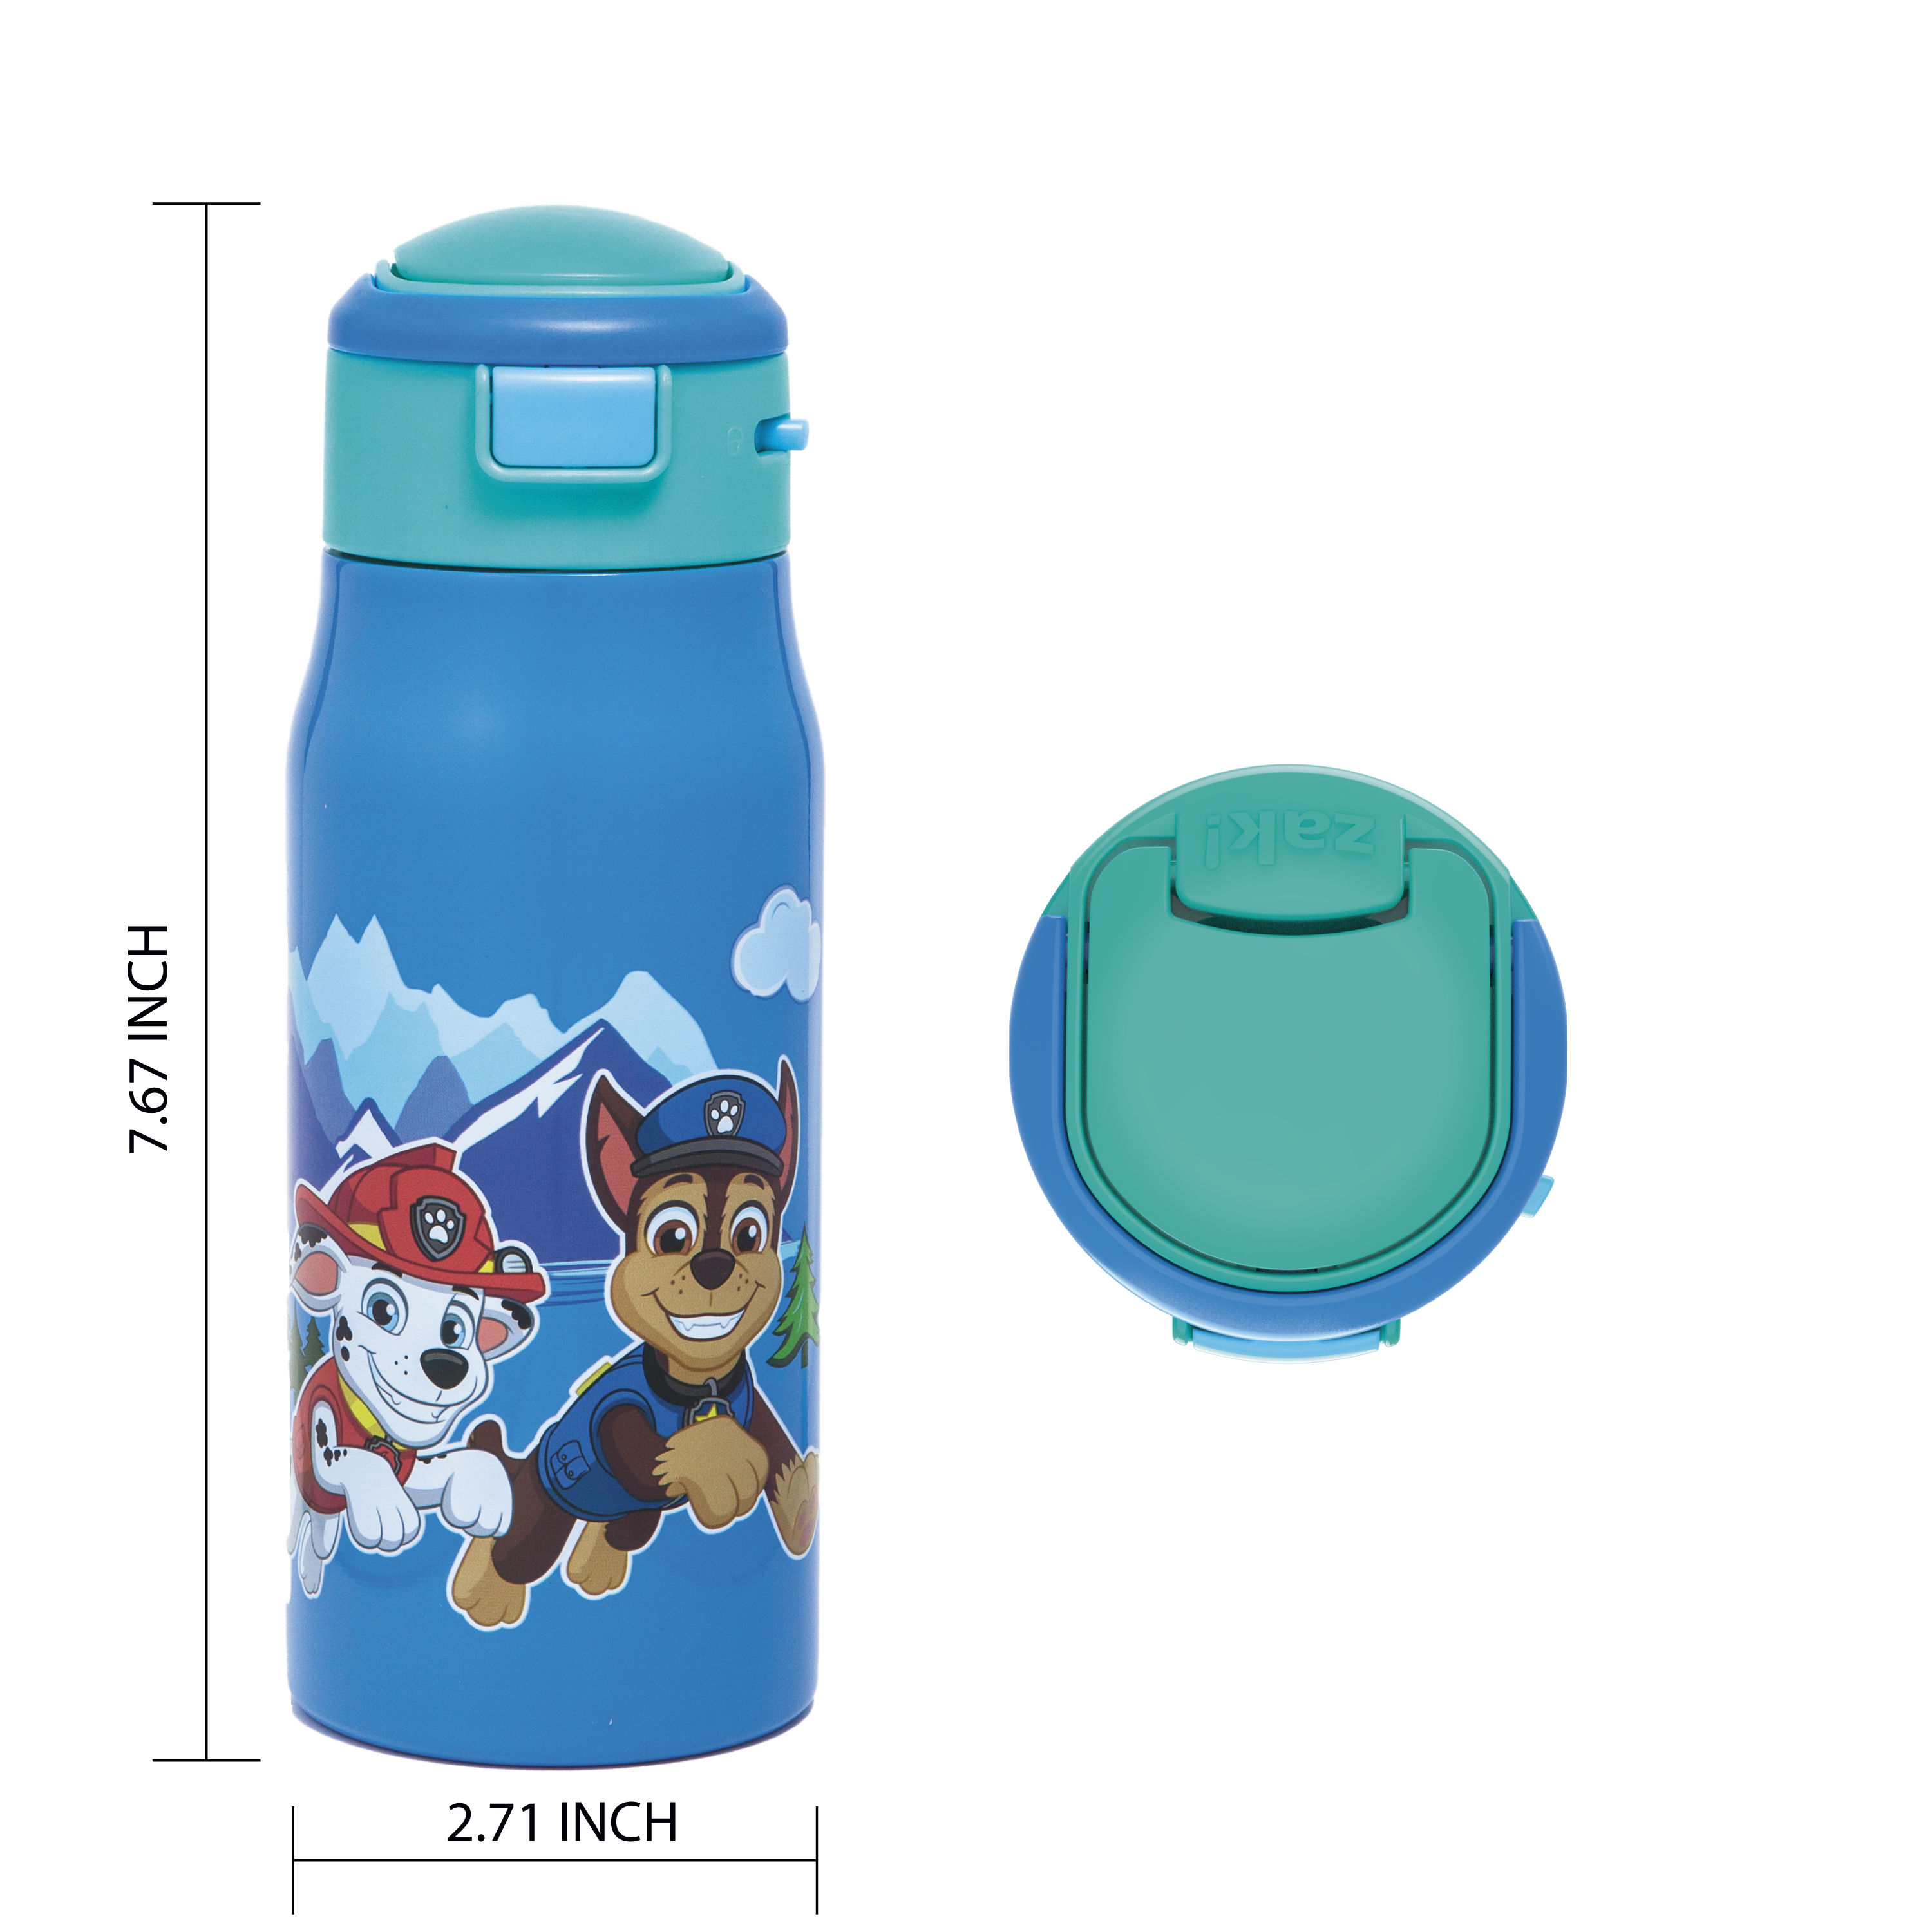 Paw Patrol 13.5 ounce Mesa Double Wall Insulated Stainless Steel Water Bottle, Chase and Marshall slideshow image 10